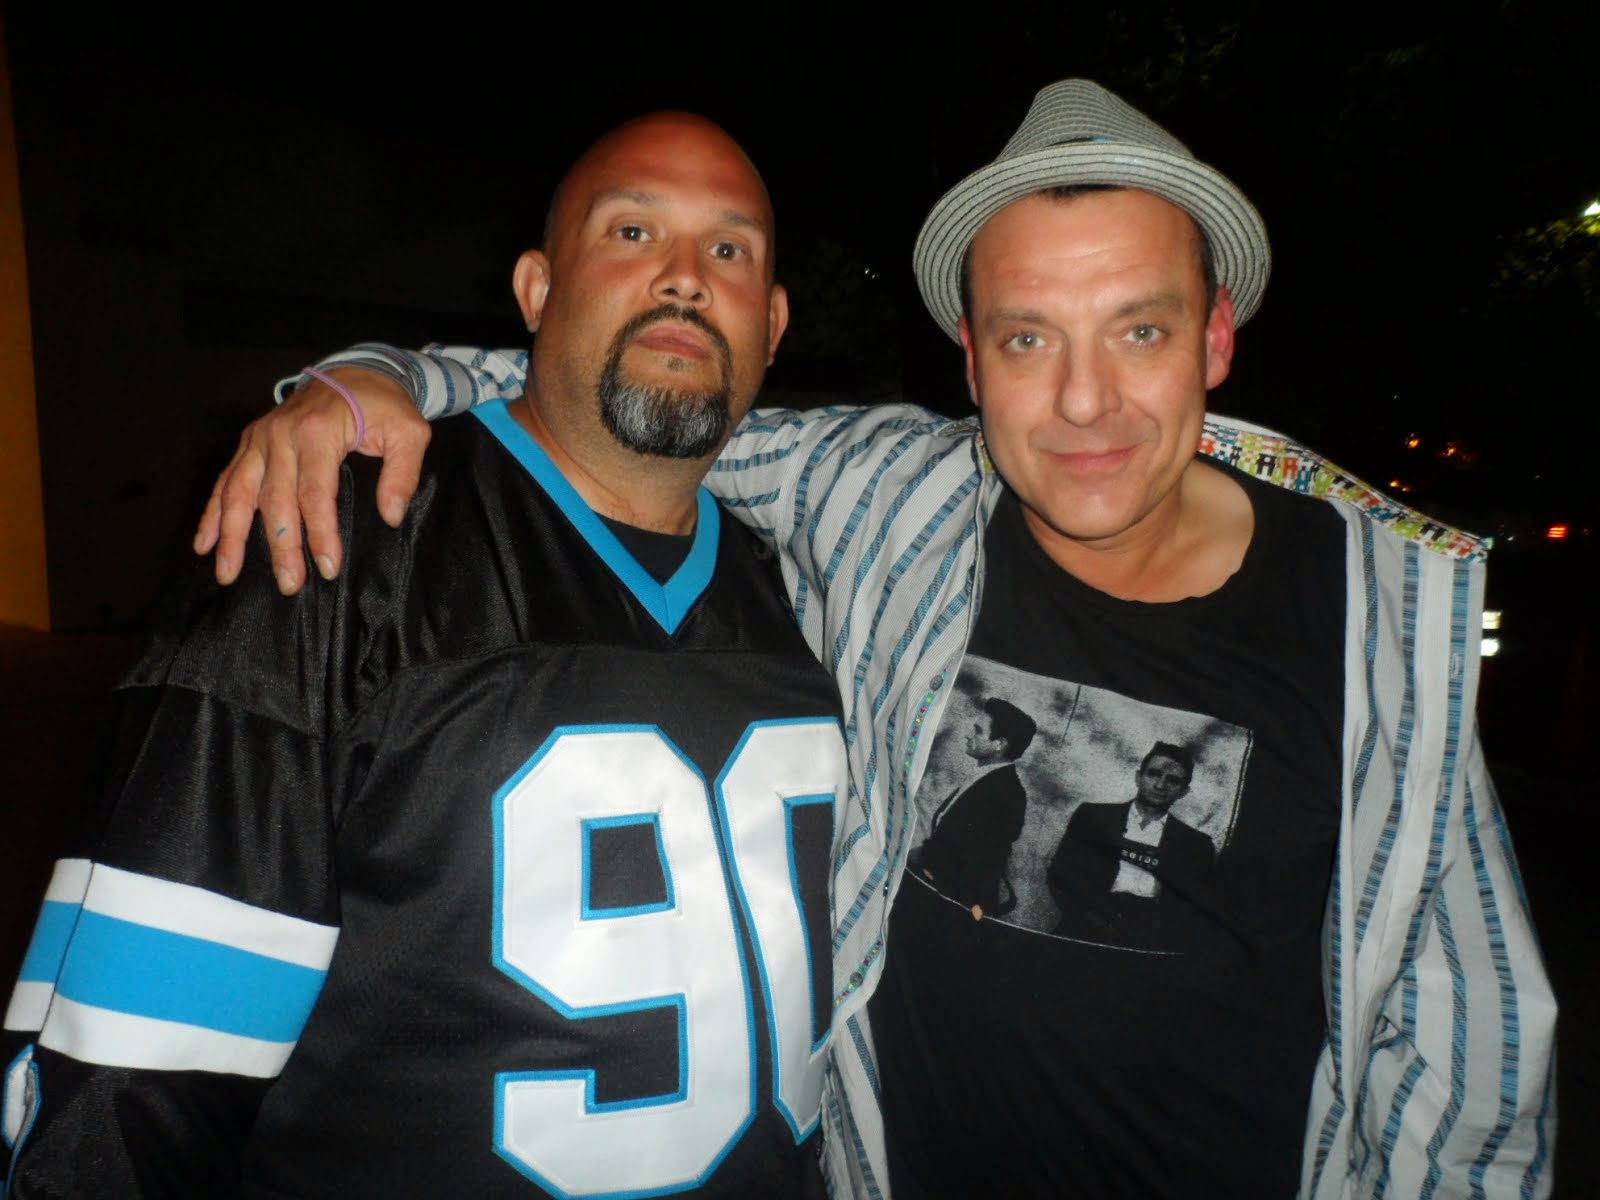 Me and Tom Sizemore